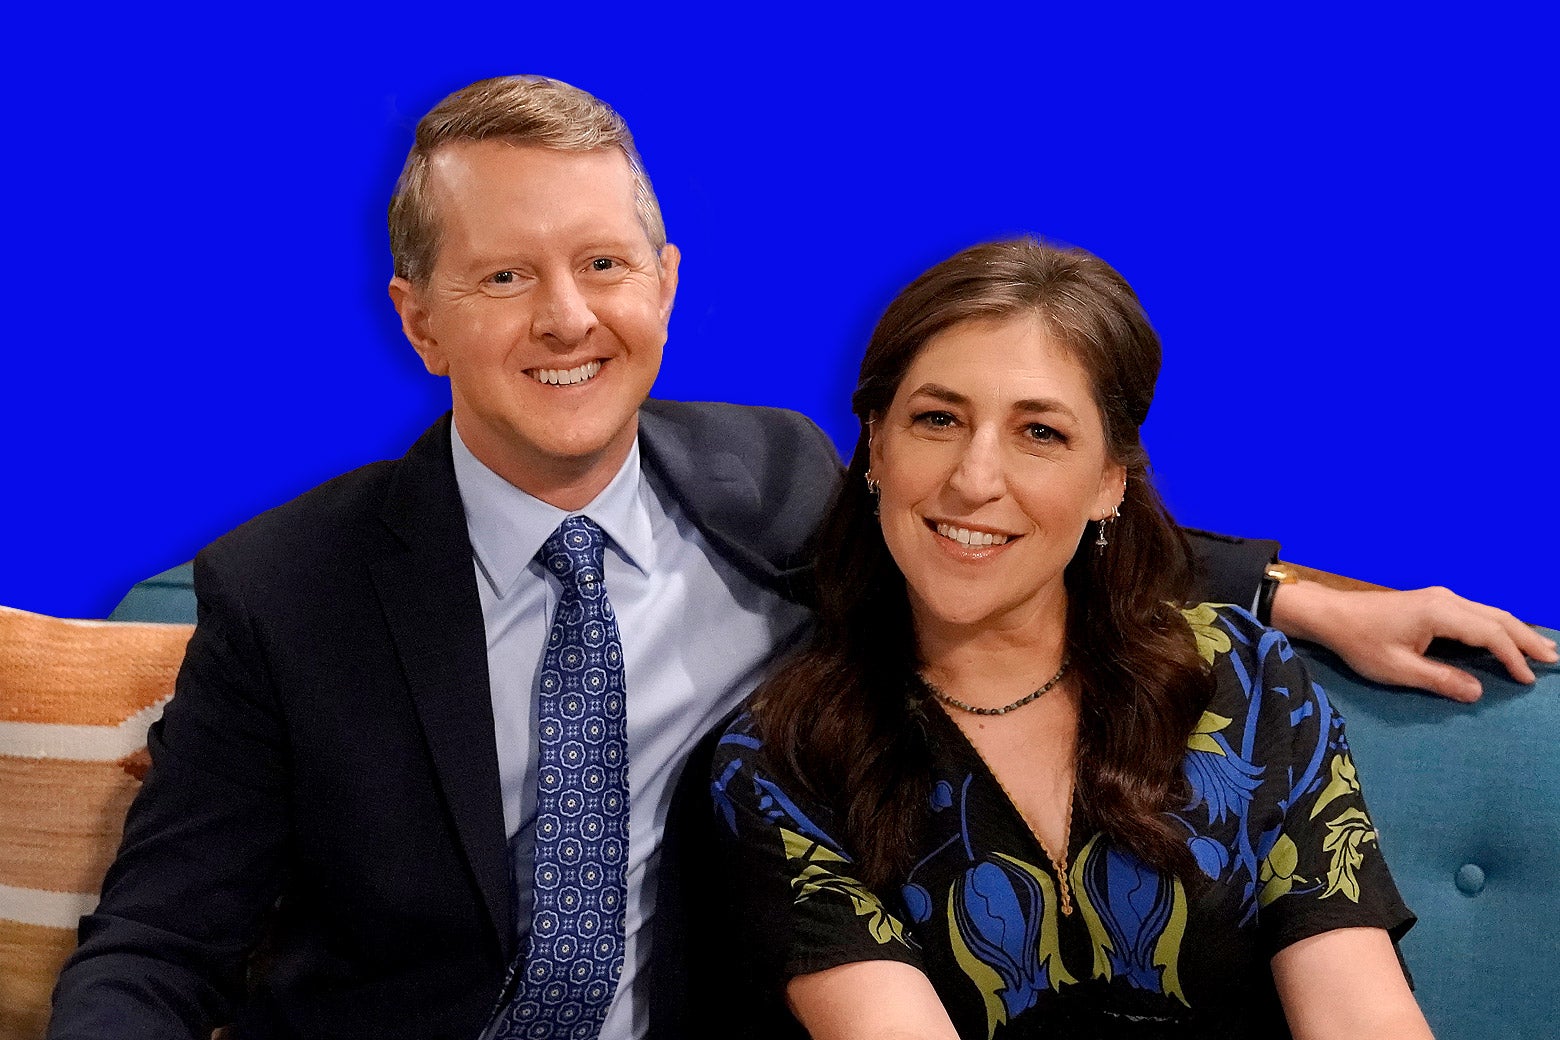 Ken Jennings and Mayim Bialik sitting together on a couch.